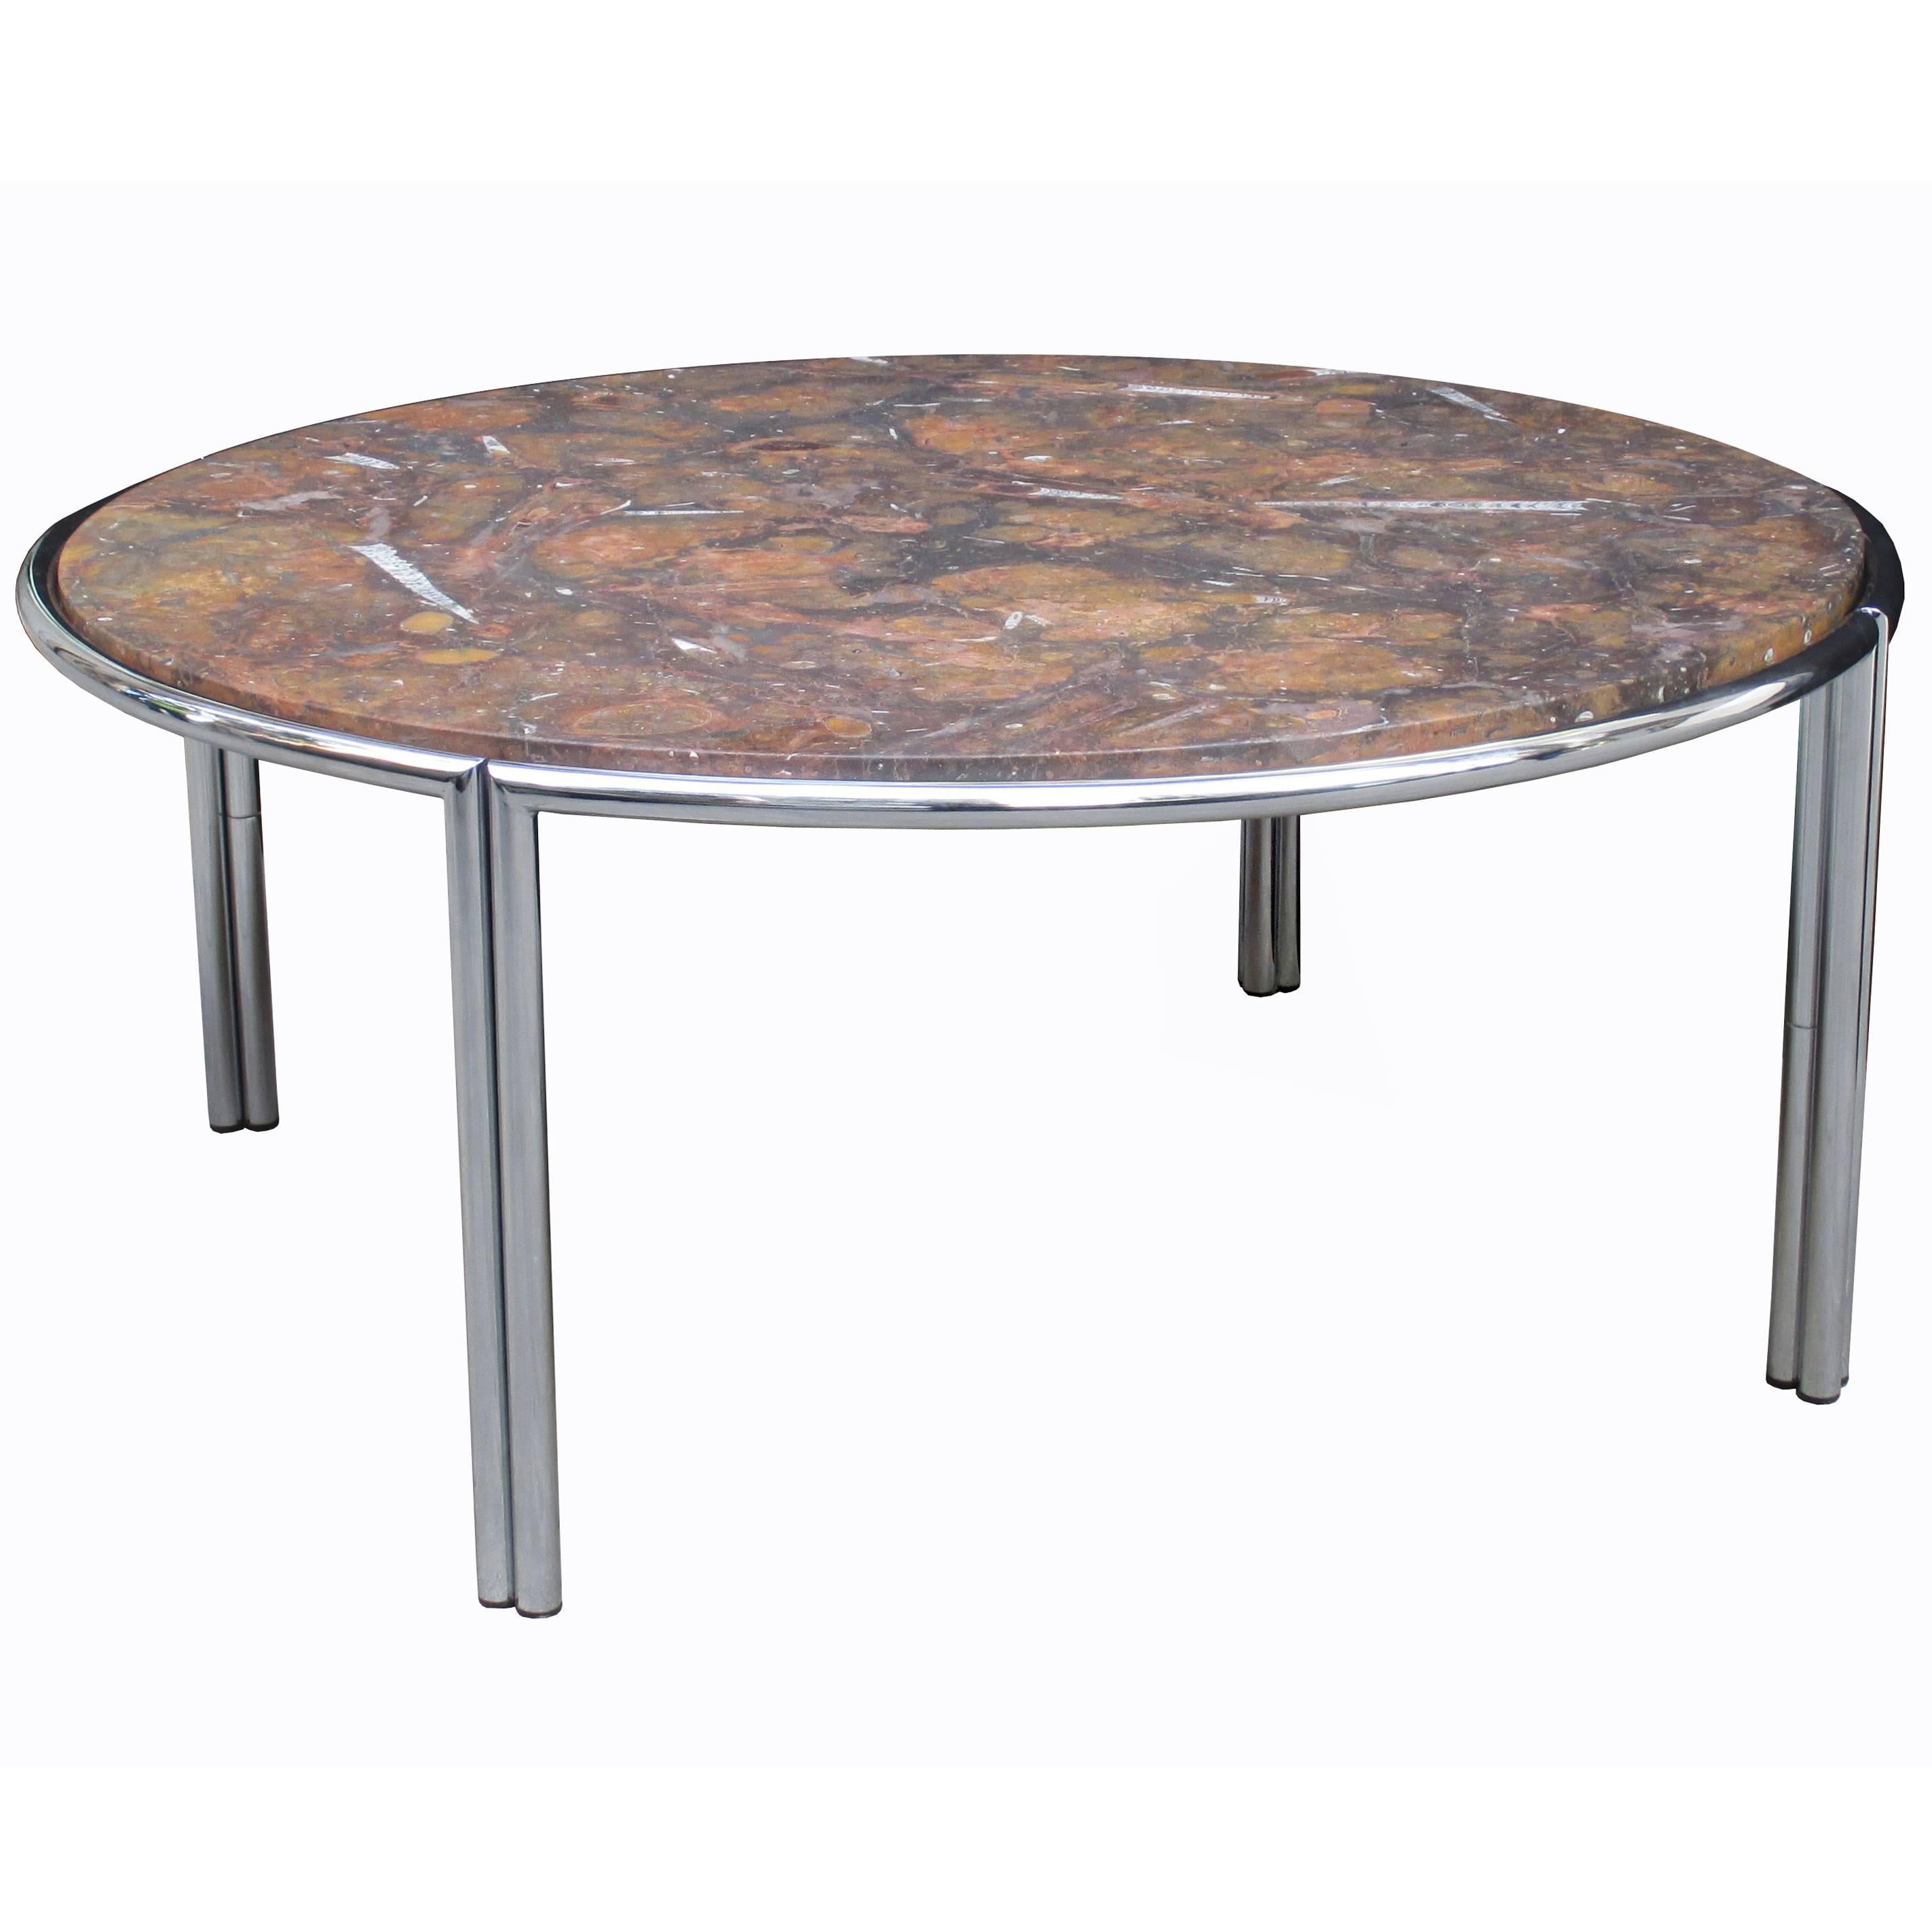 Italian Modernist Cocktail Table with Fossil Marble Top For Sale